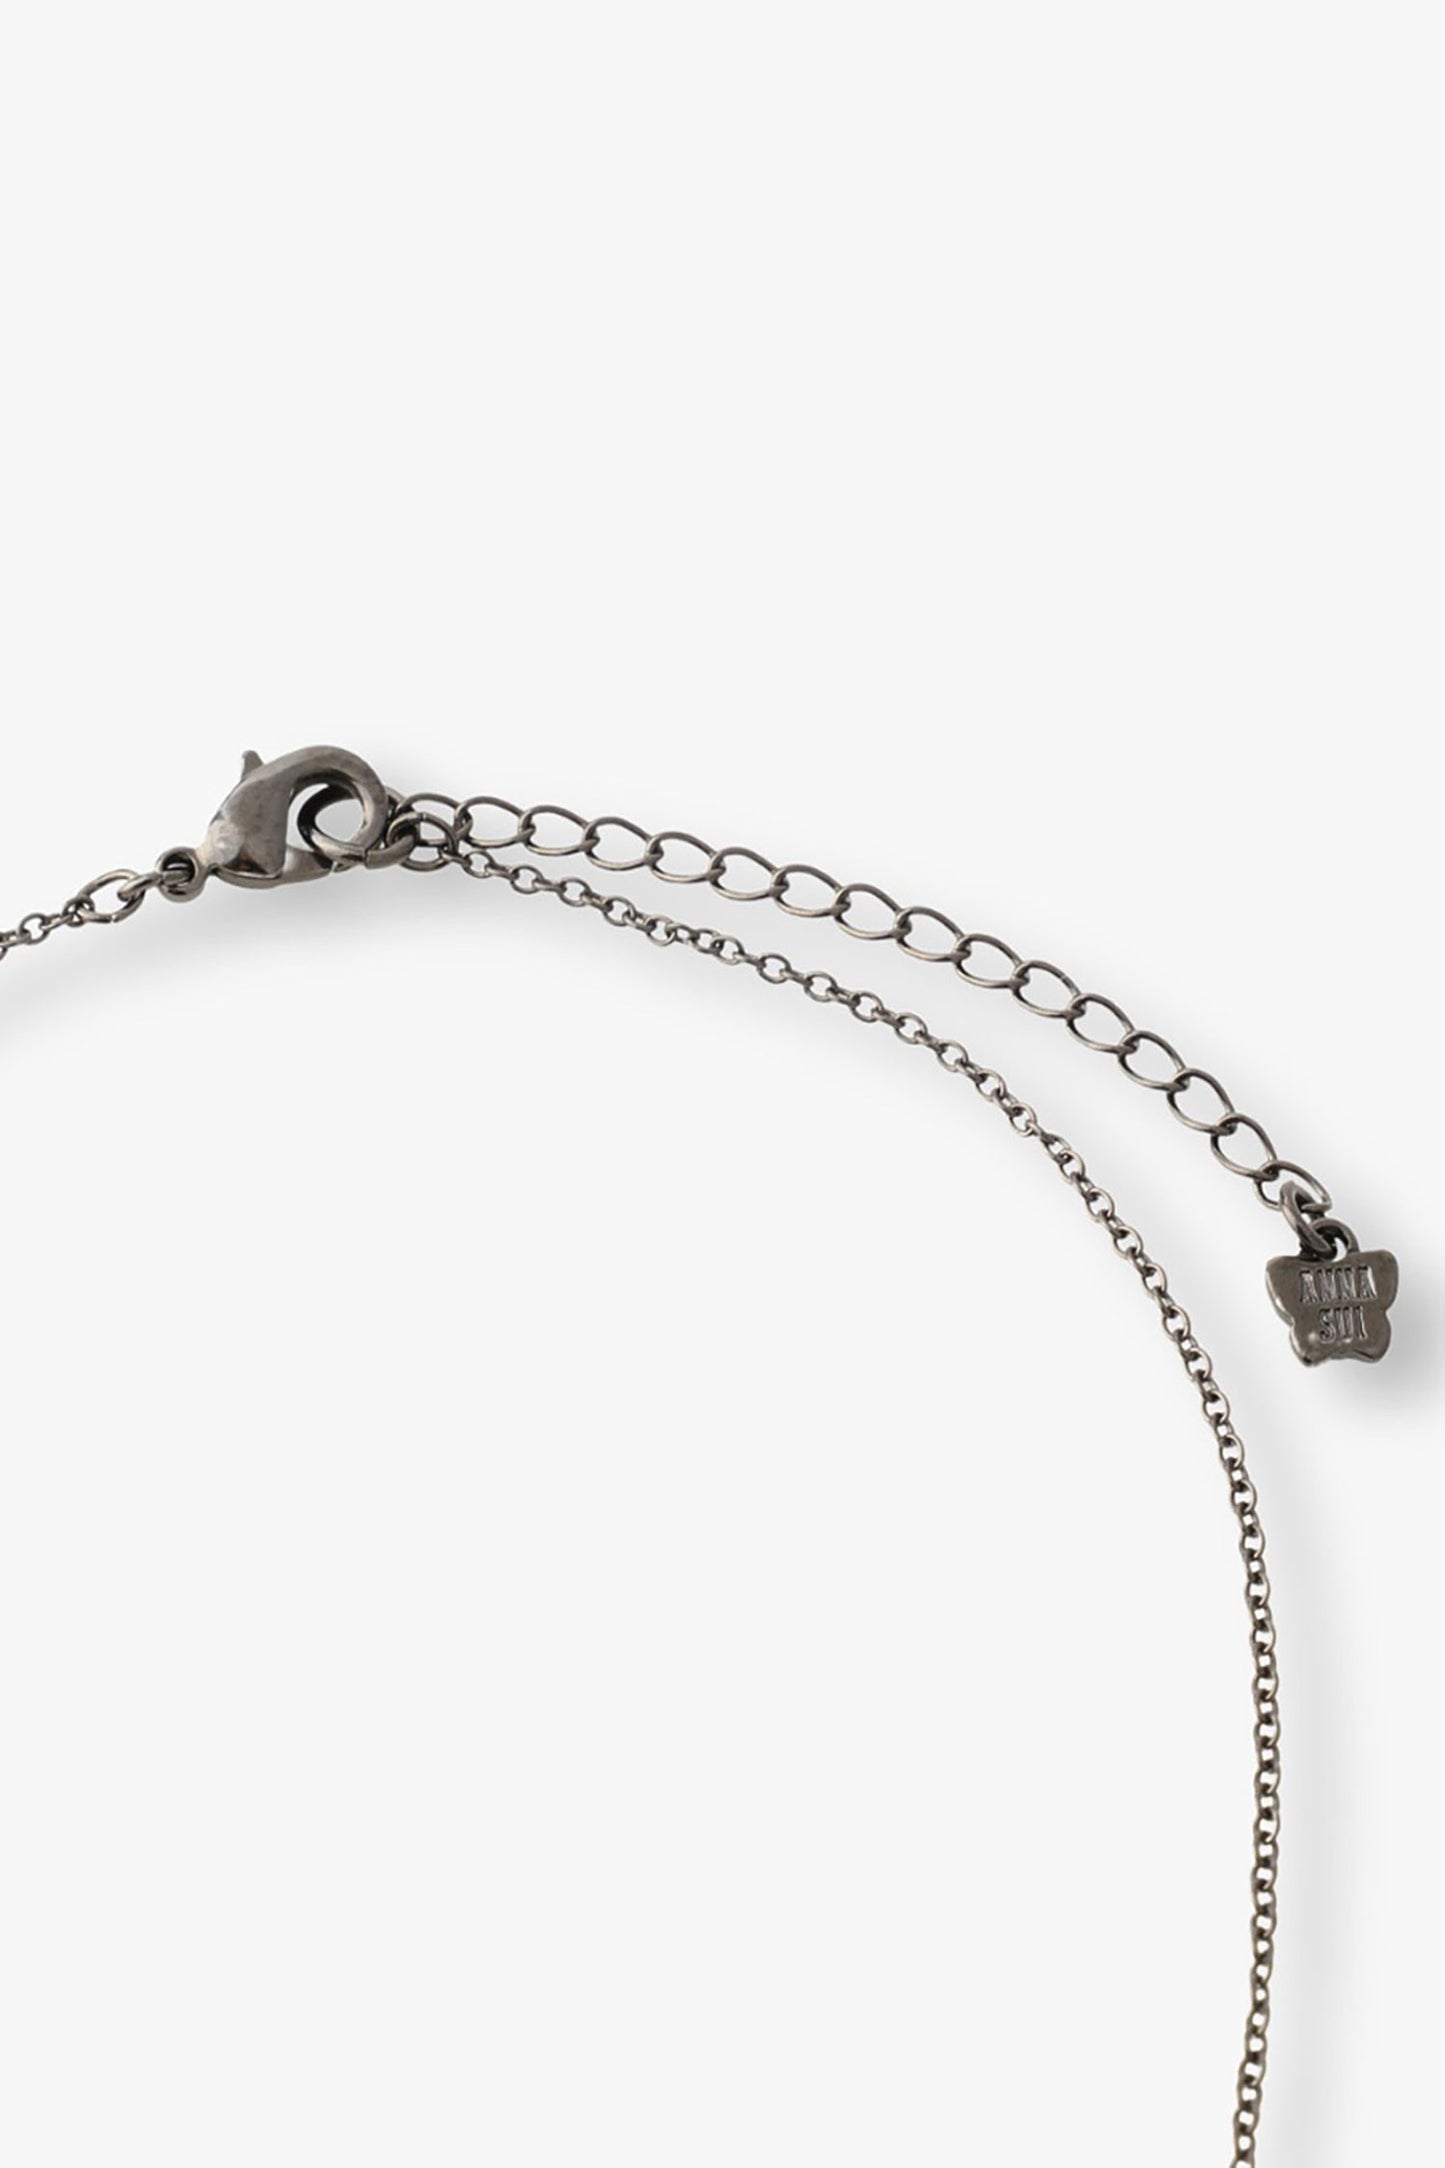 Gunmetal lobster claw clasp with large links for adjustability, Anna Sui imprint on a tag, set one